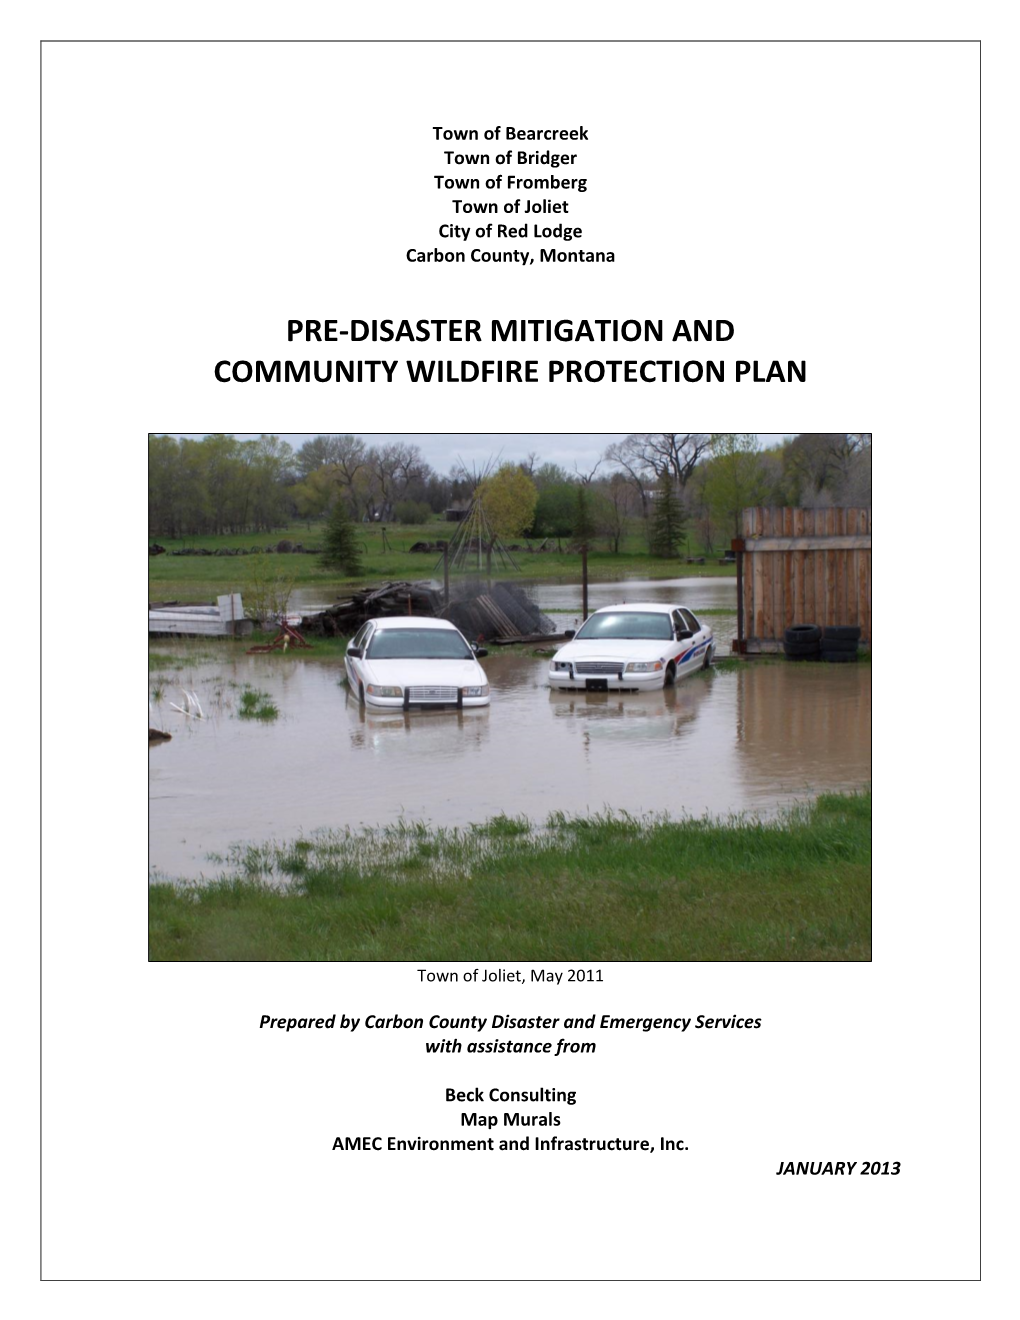 Pre-Disaster Mitigation and Community Wildfire Protection Plan